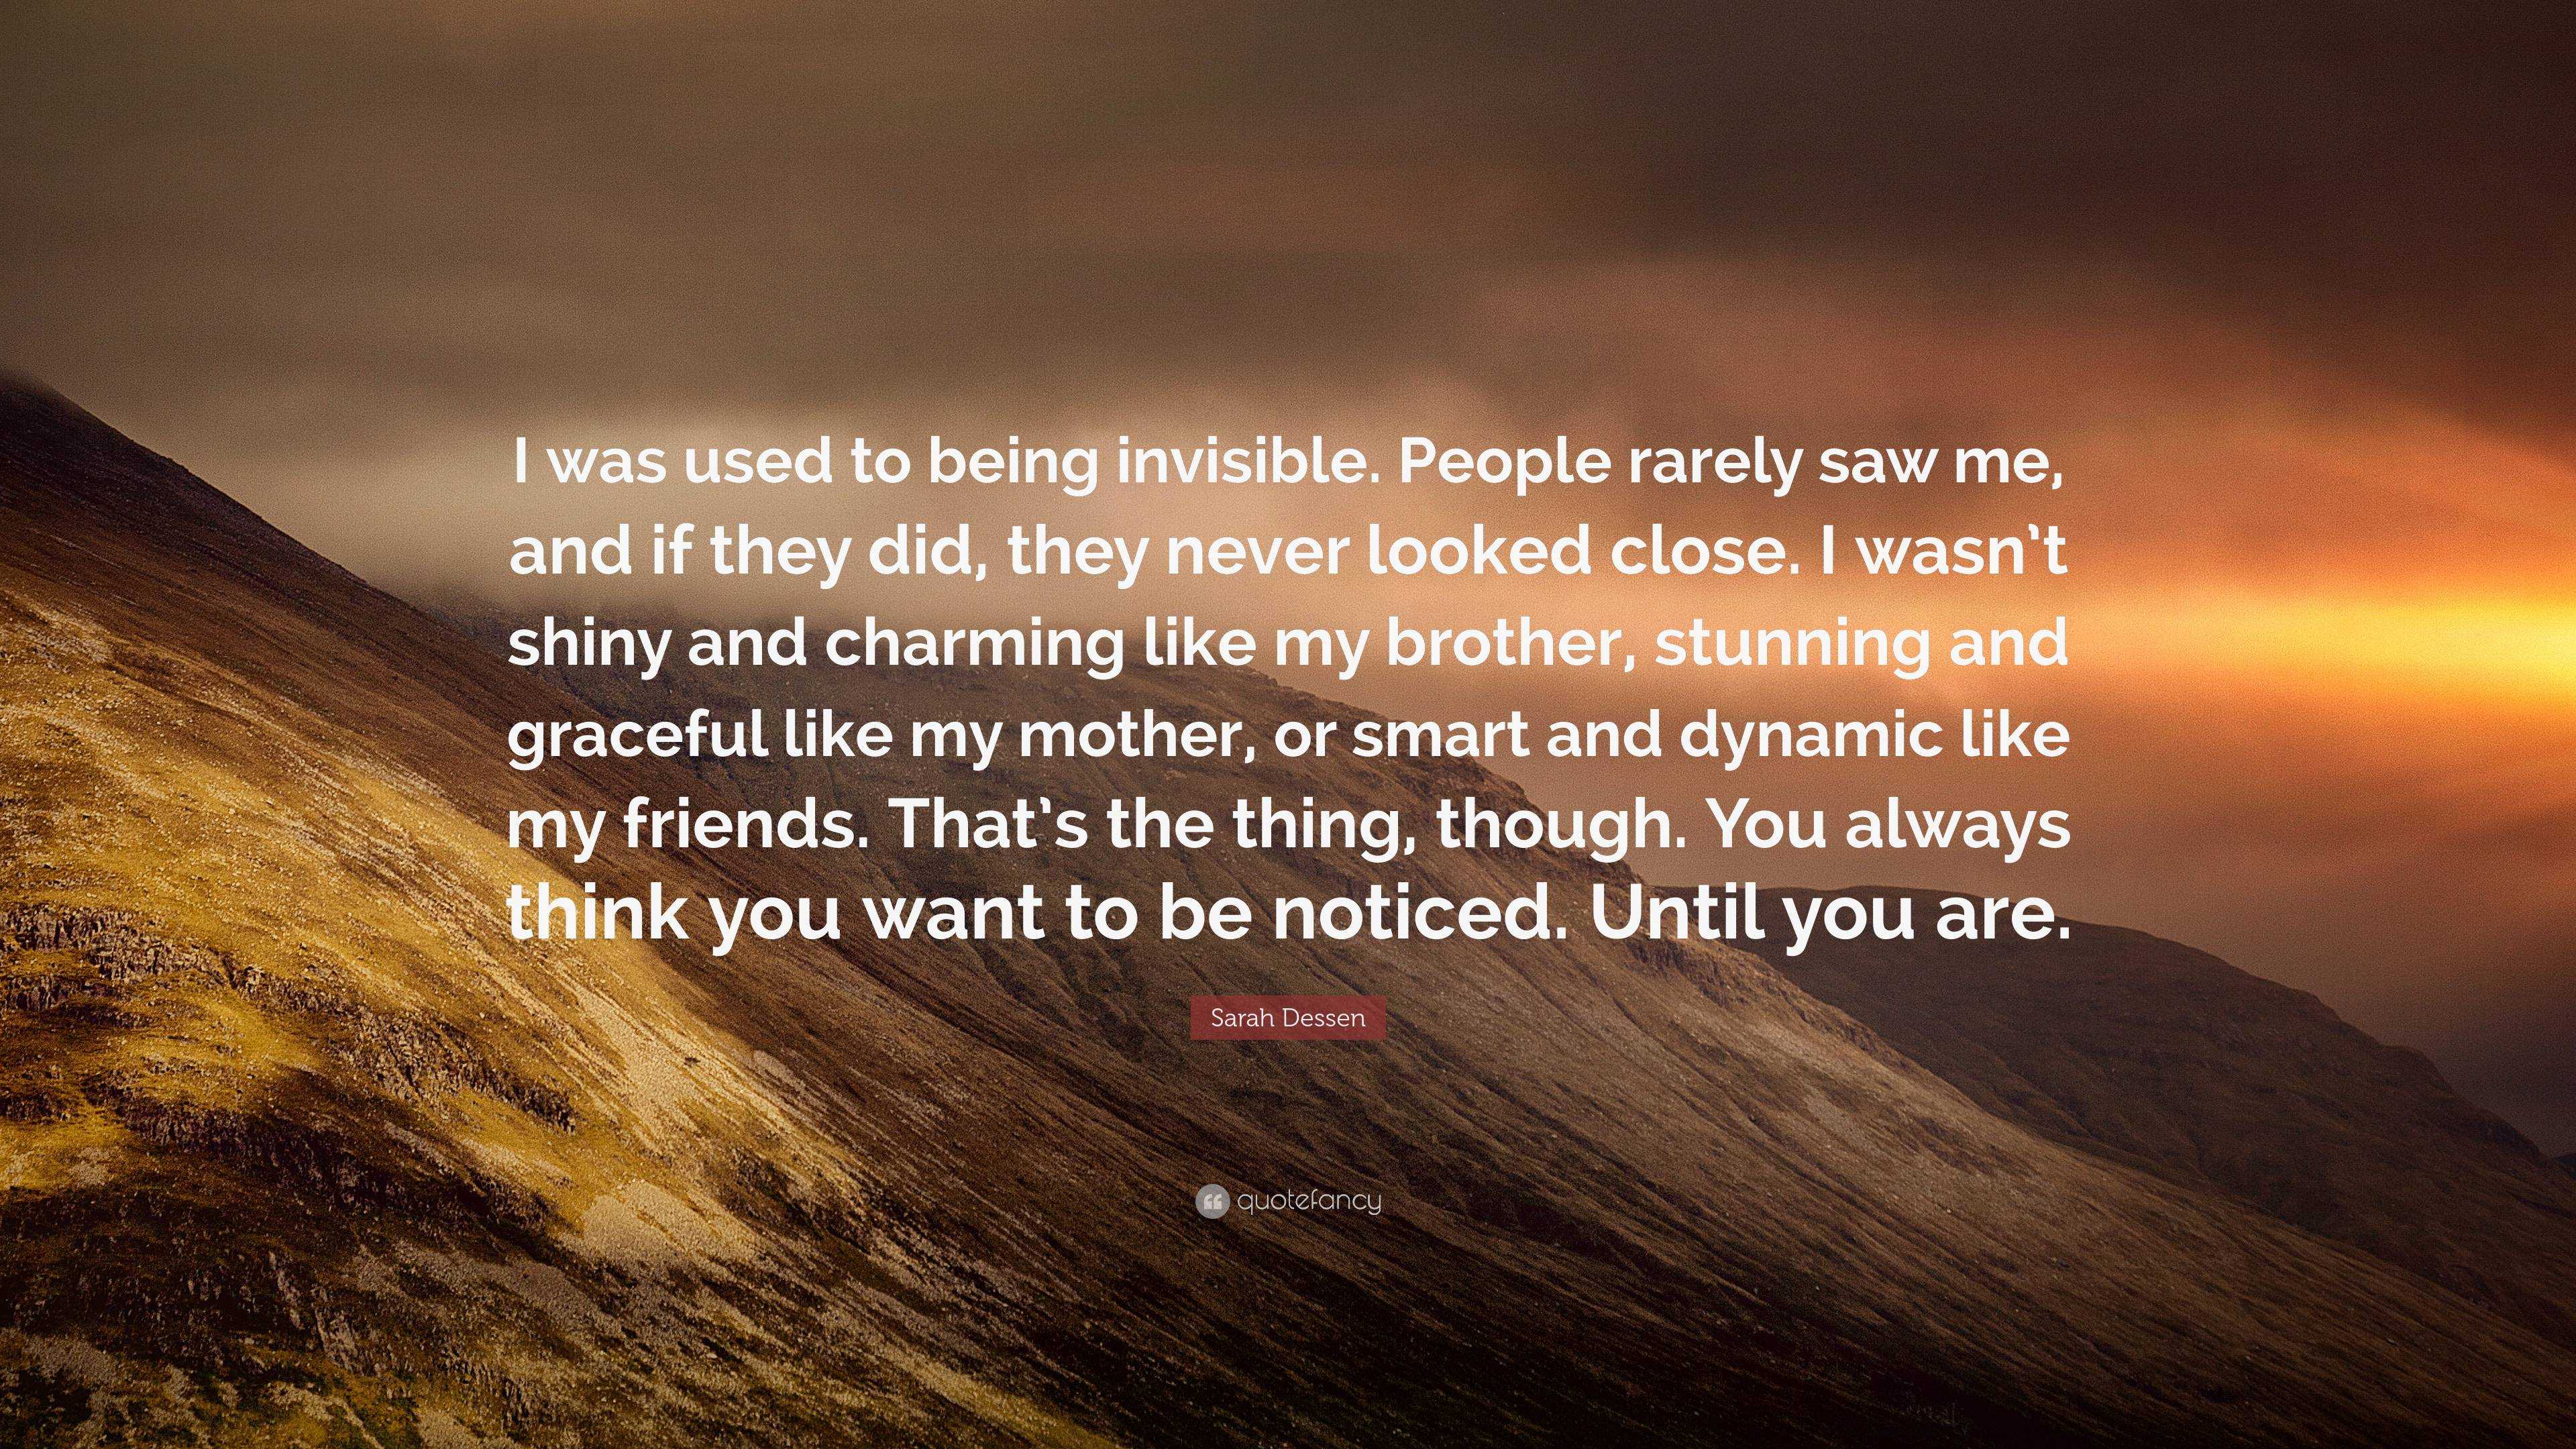 Sarah Dessen Quote: “I was used to being invisible. People rarely saw ...